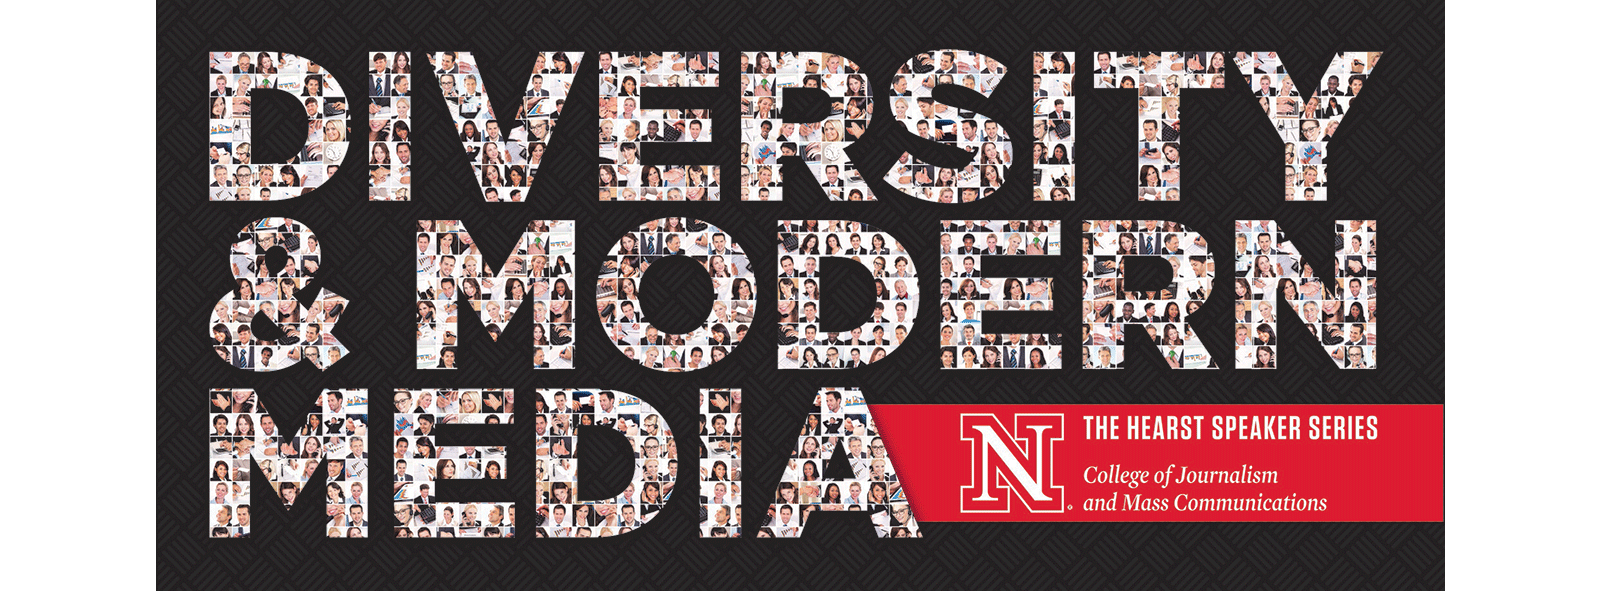 Diversity Series Graphic University of Nebraska–Lincoln College of Journalism and Mass Communications Presents: Diversity and Modern Media. Fine Print: The Hearst Speaker Series, College of Journalism and Mass Communications.